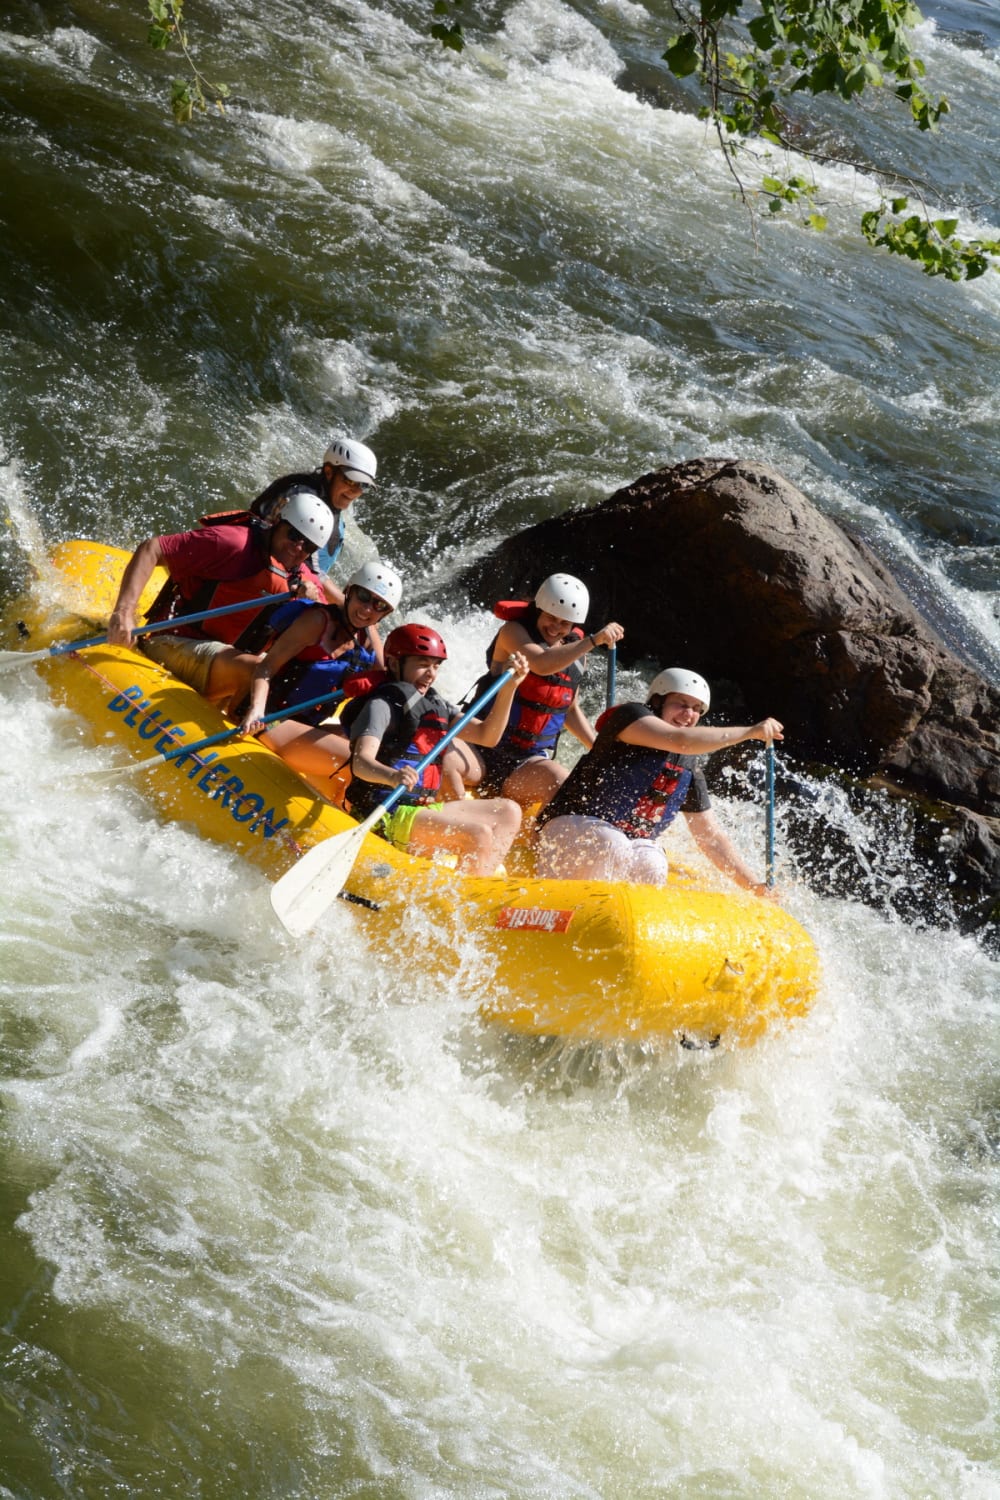 Whitewater rafting adventures in Asheville